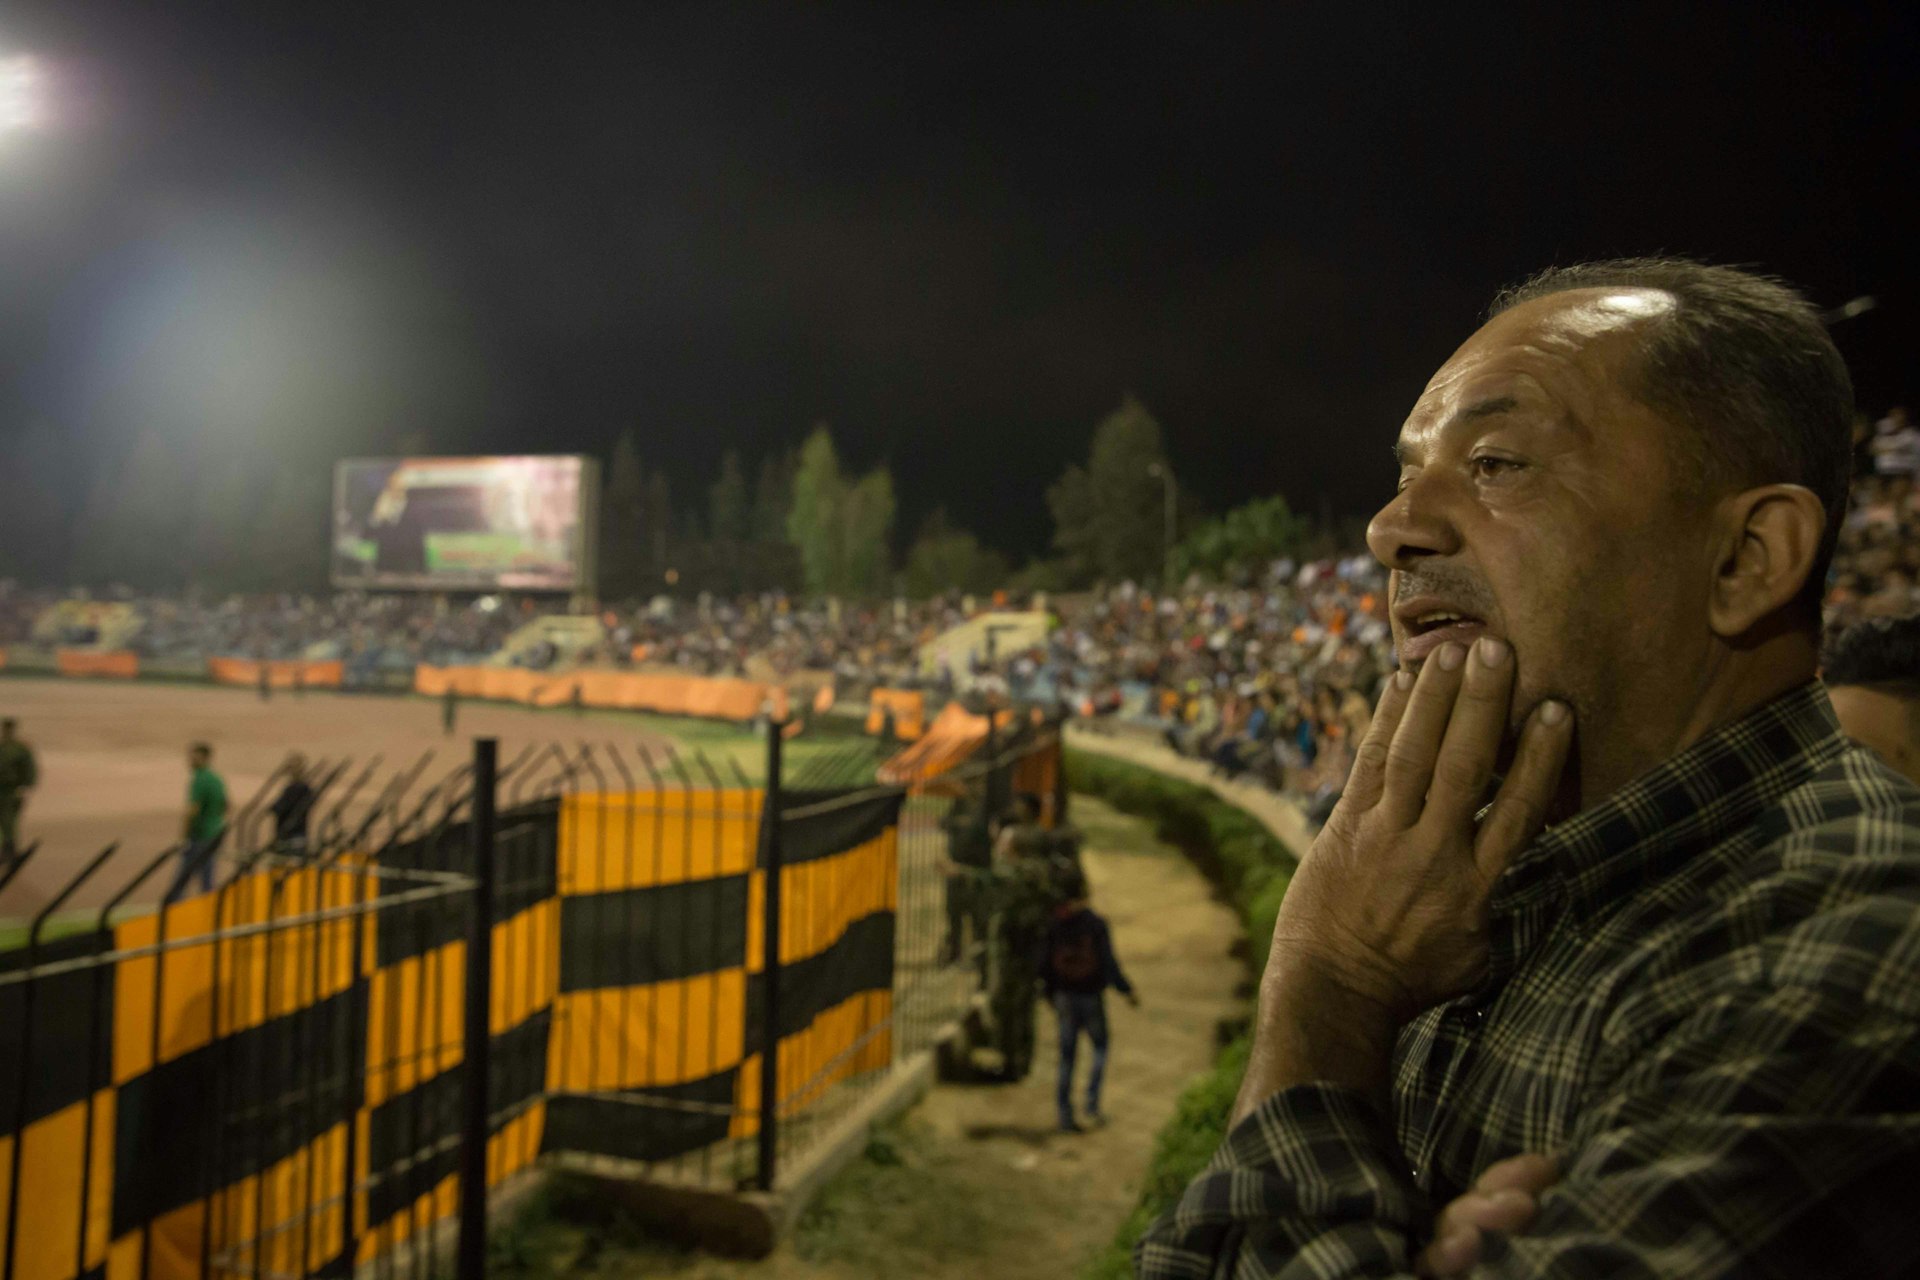 Fouad Ibrahim, a 55-year-old local who has been attending matches since he was 15, said the routine of football has brought him comfort during the war.